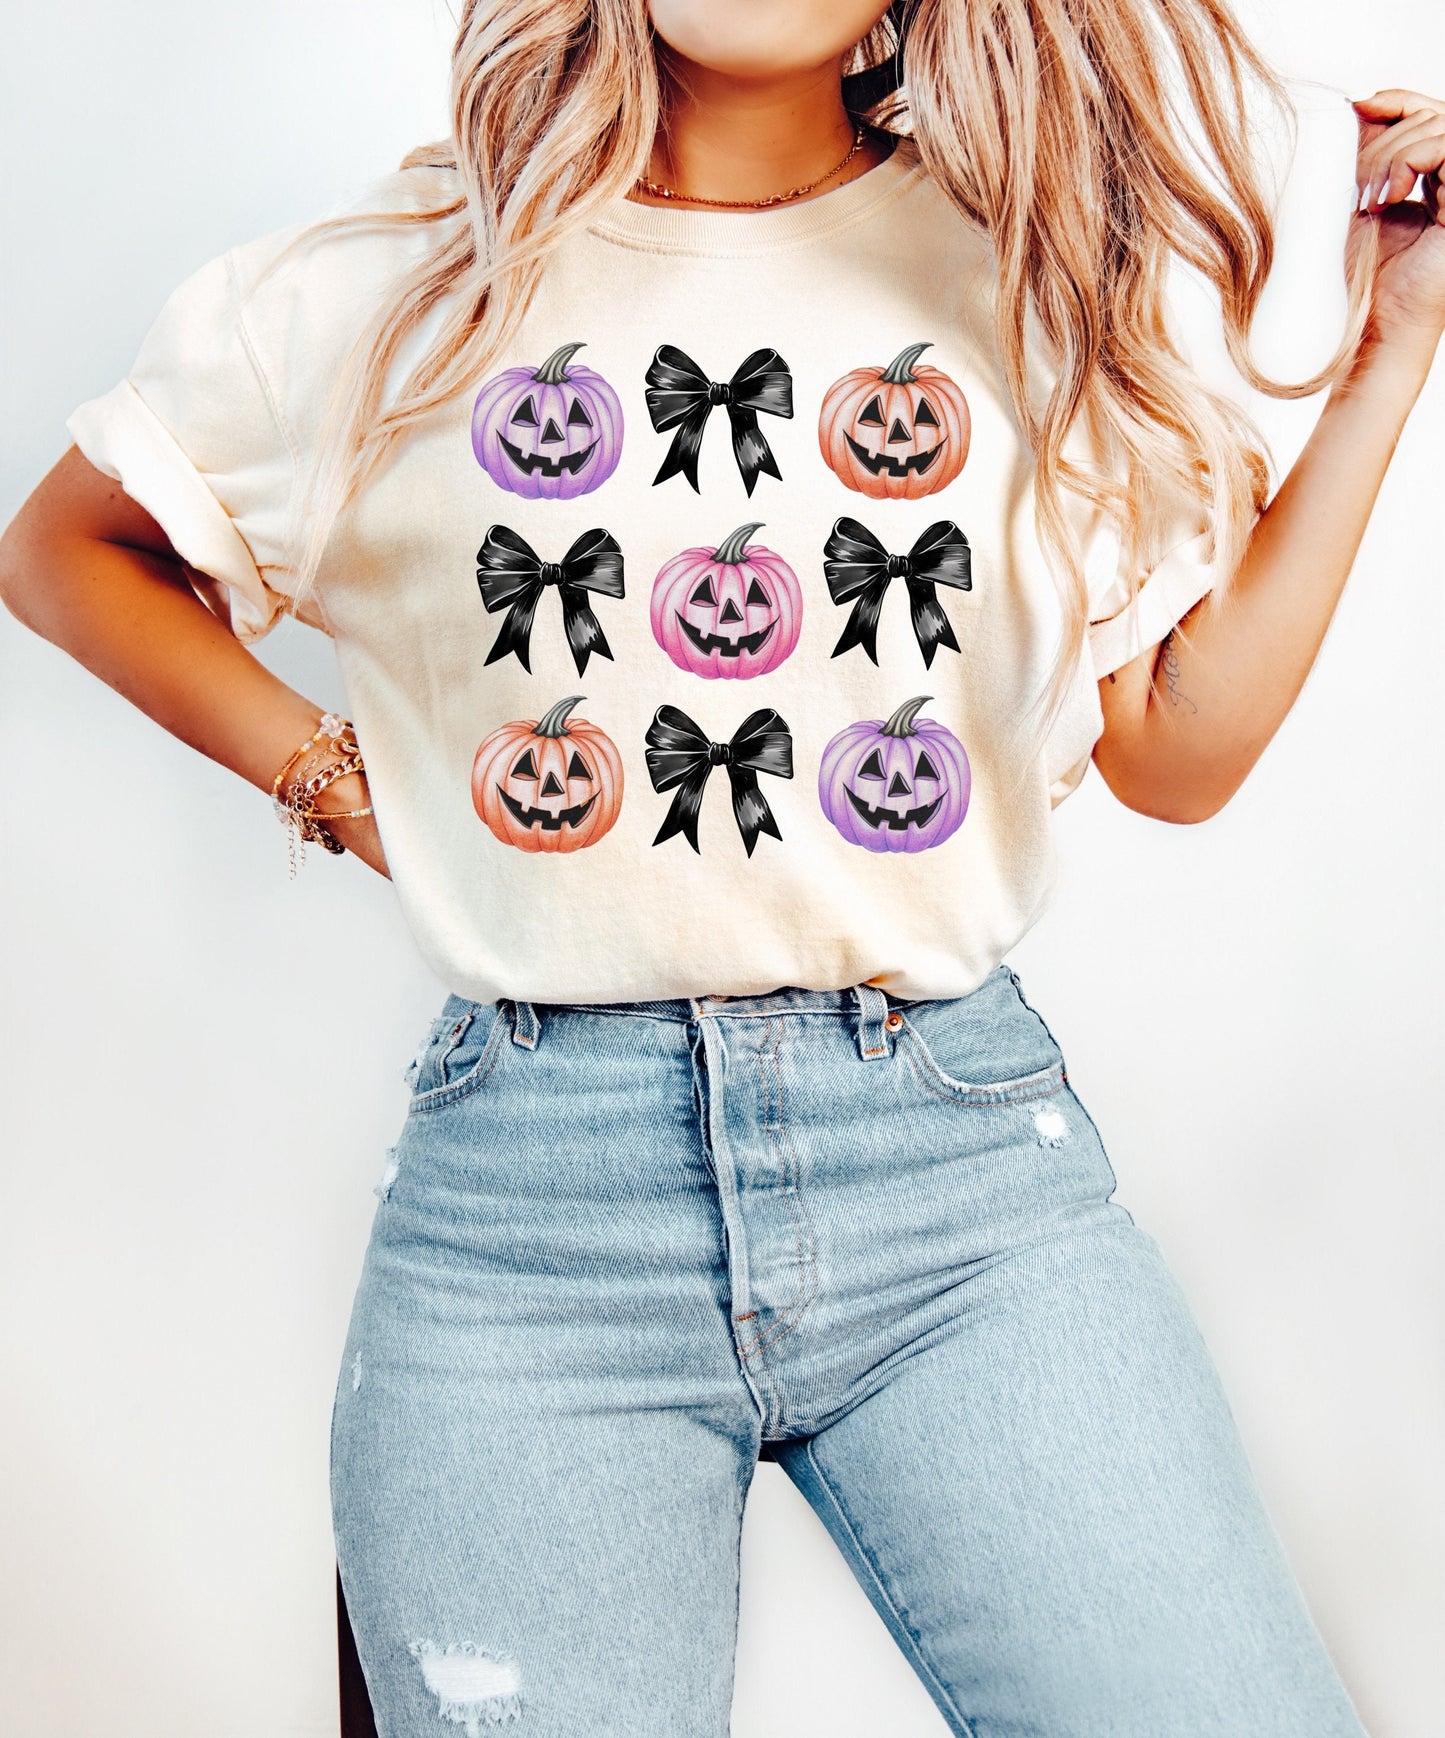 Pastel Pumpkins and Bows Collage Halloween Shirt, Coquette Bow Halloween Shirt, Halloween Shirts, Spooky Season Shirt, Coquette Top